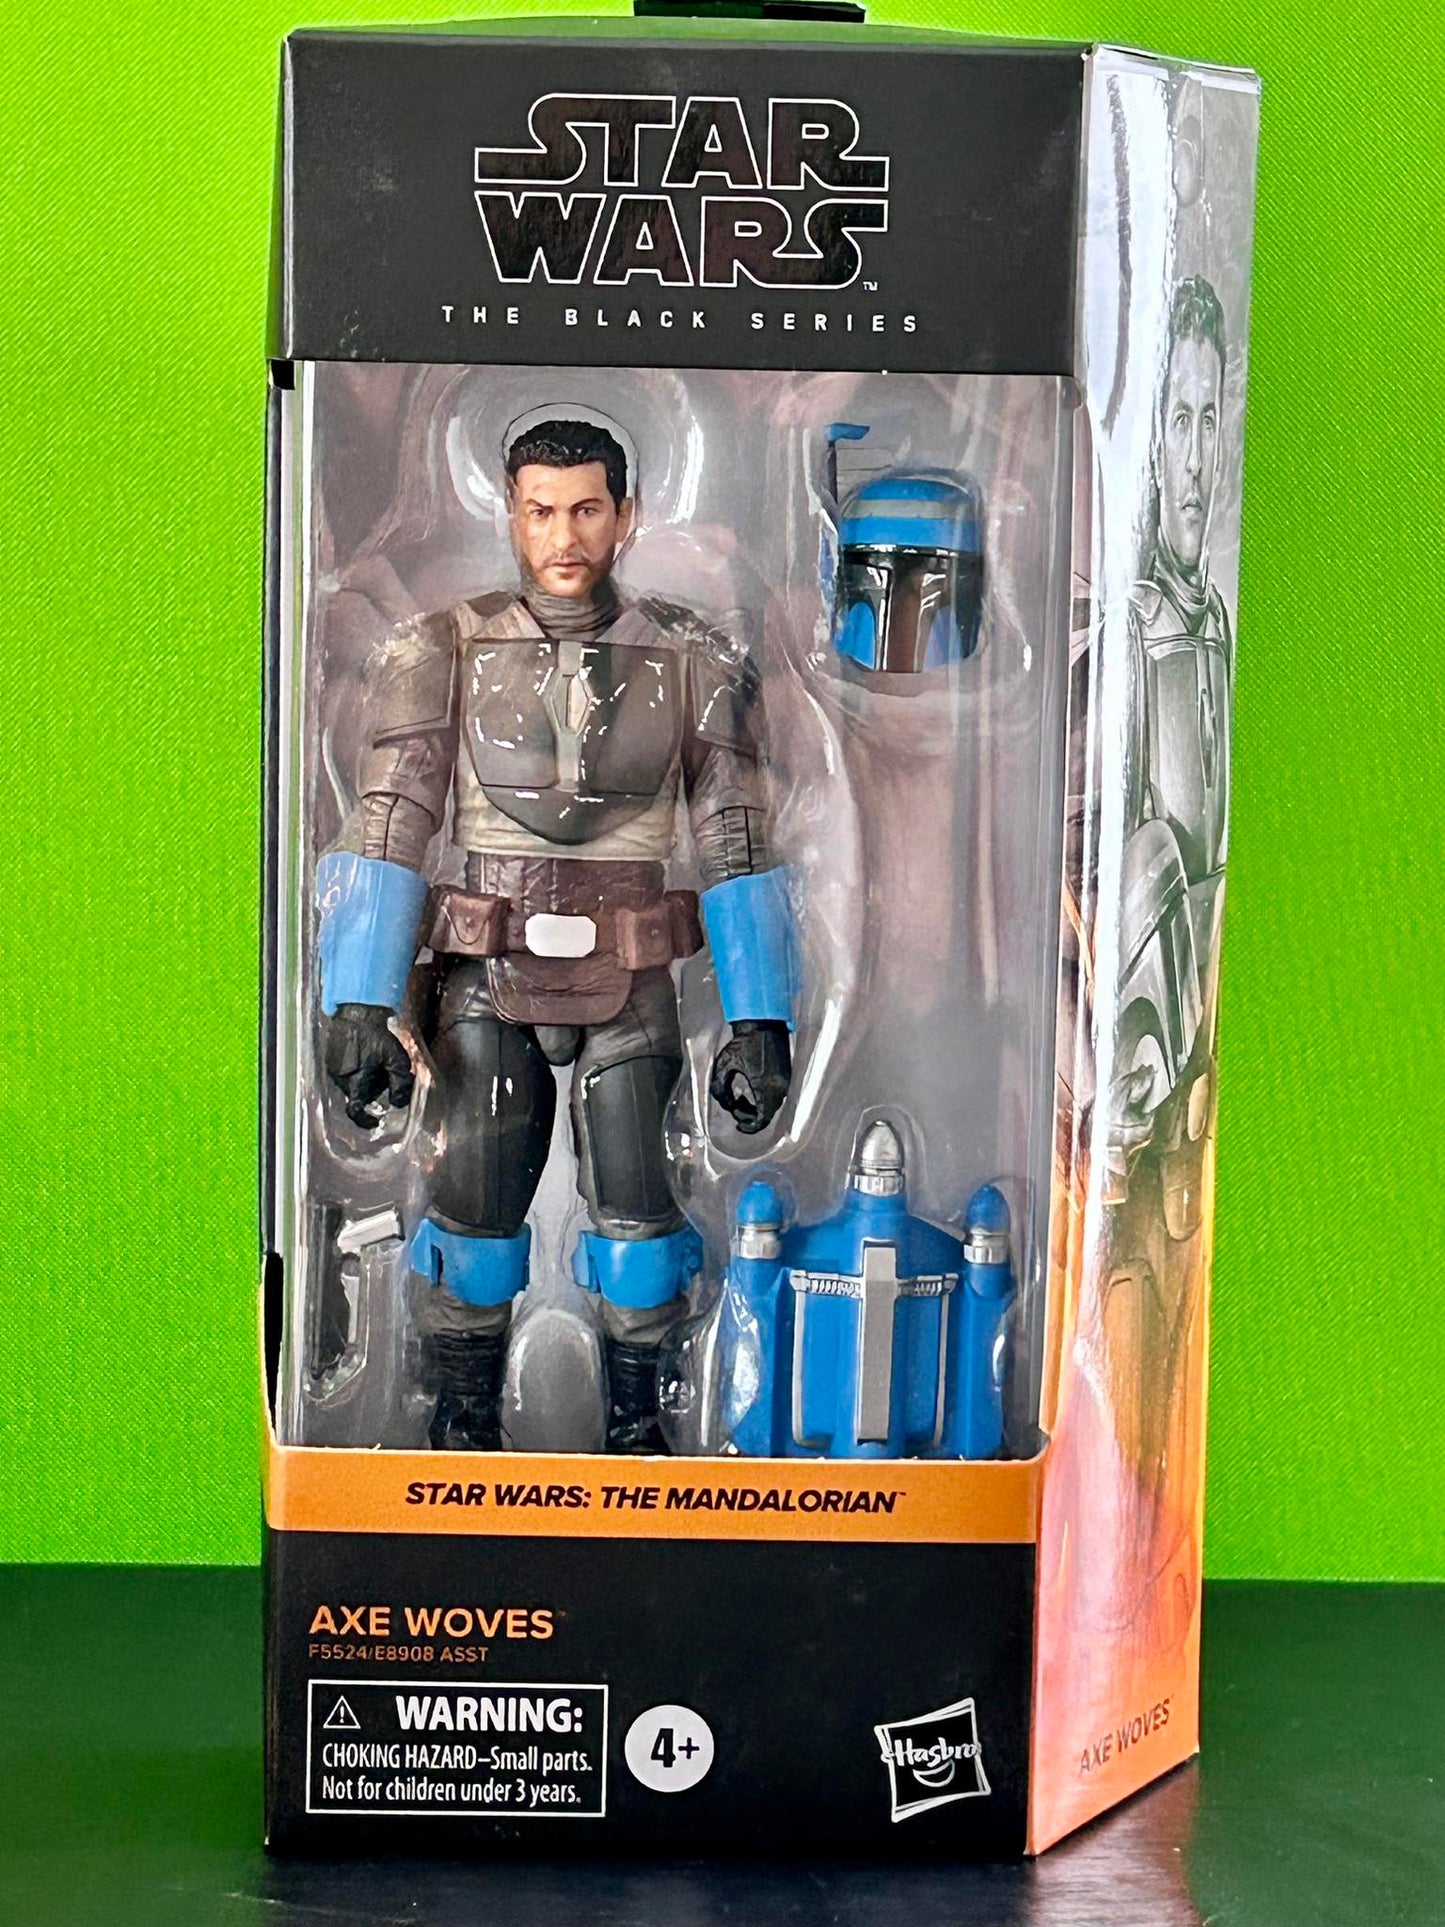 Star Wars The Black Series - Ax Woves 15cm Action Figure